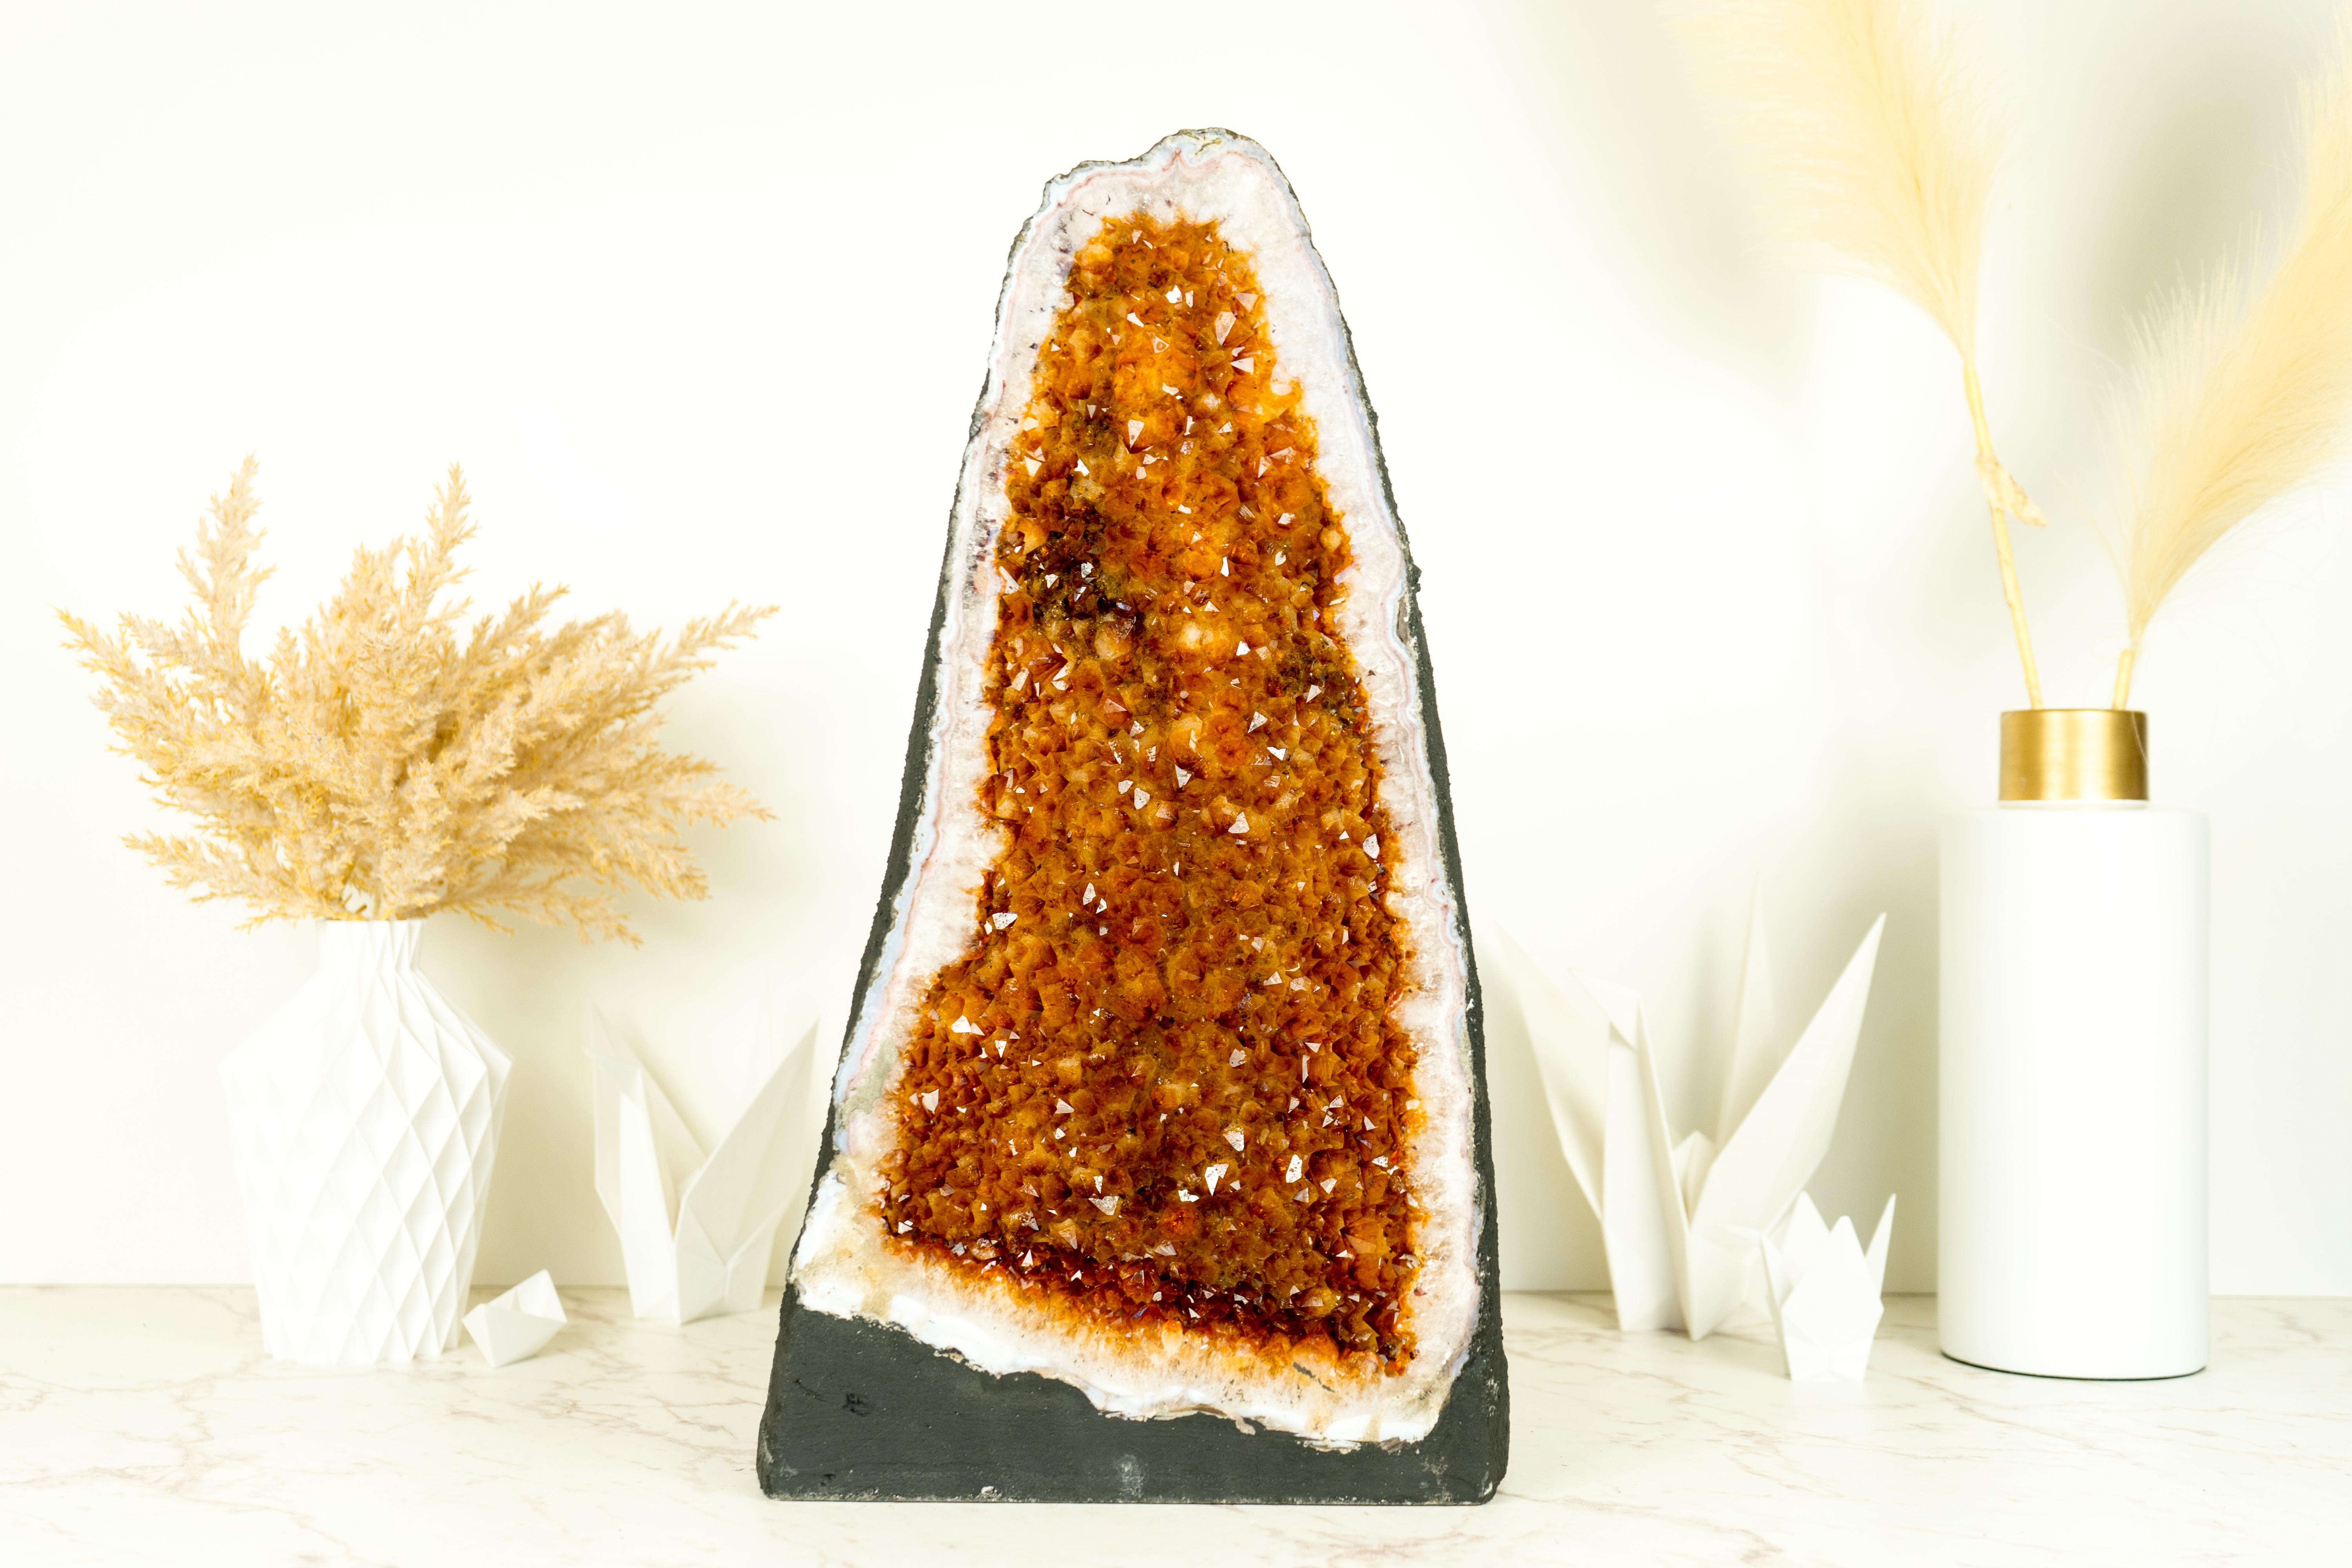 Brazilian Pair of Citrine Geode Cathedrals with Sparkling AAA-Grade, Rich Orange Druzy